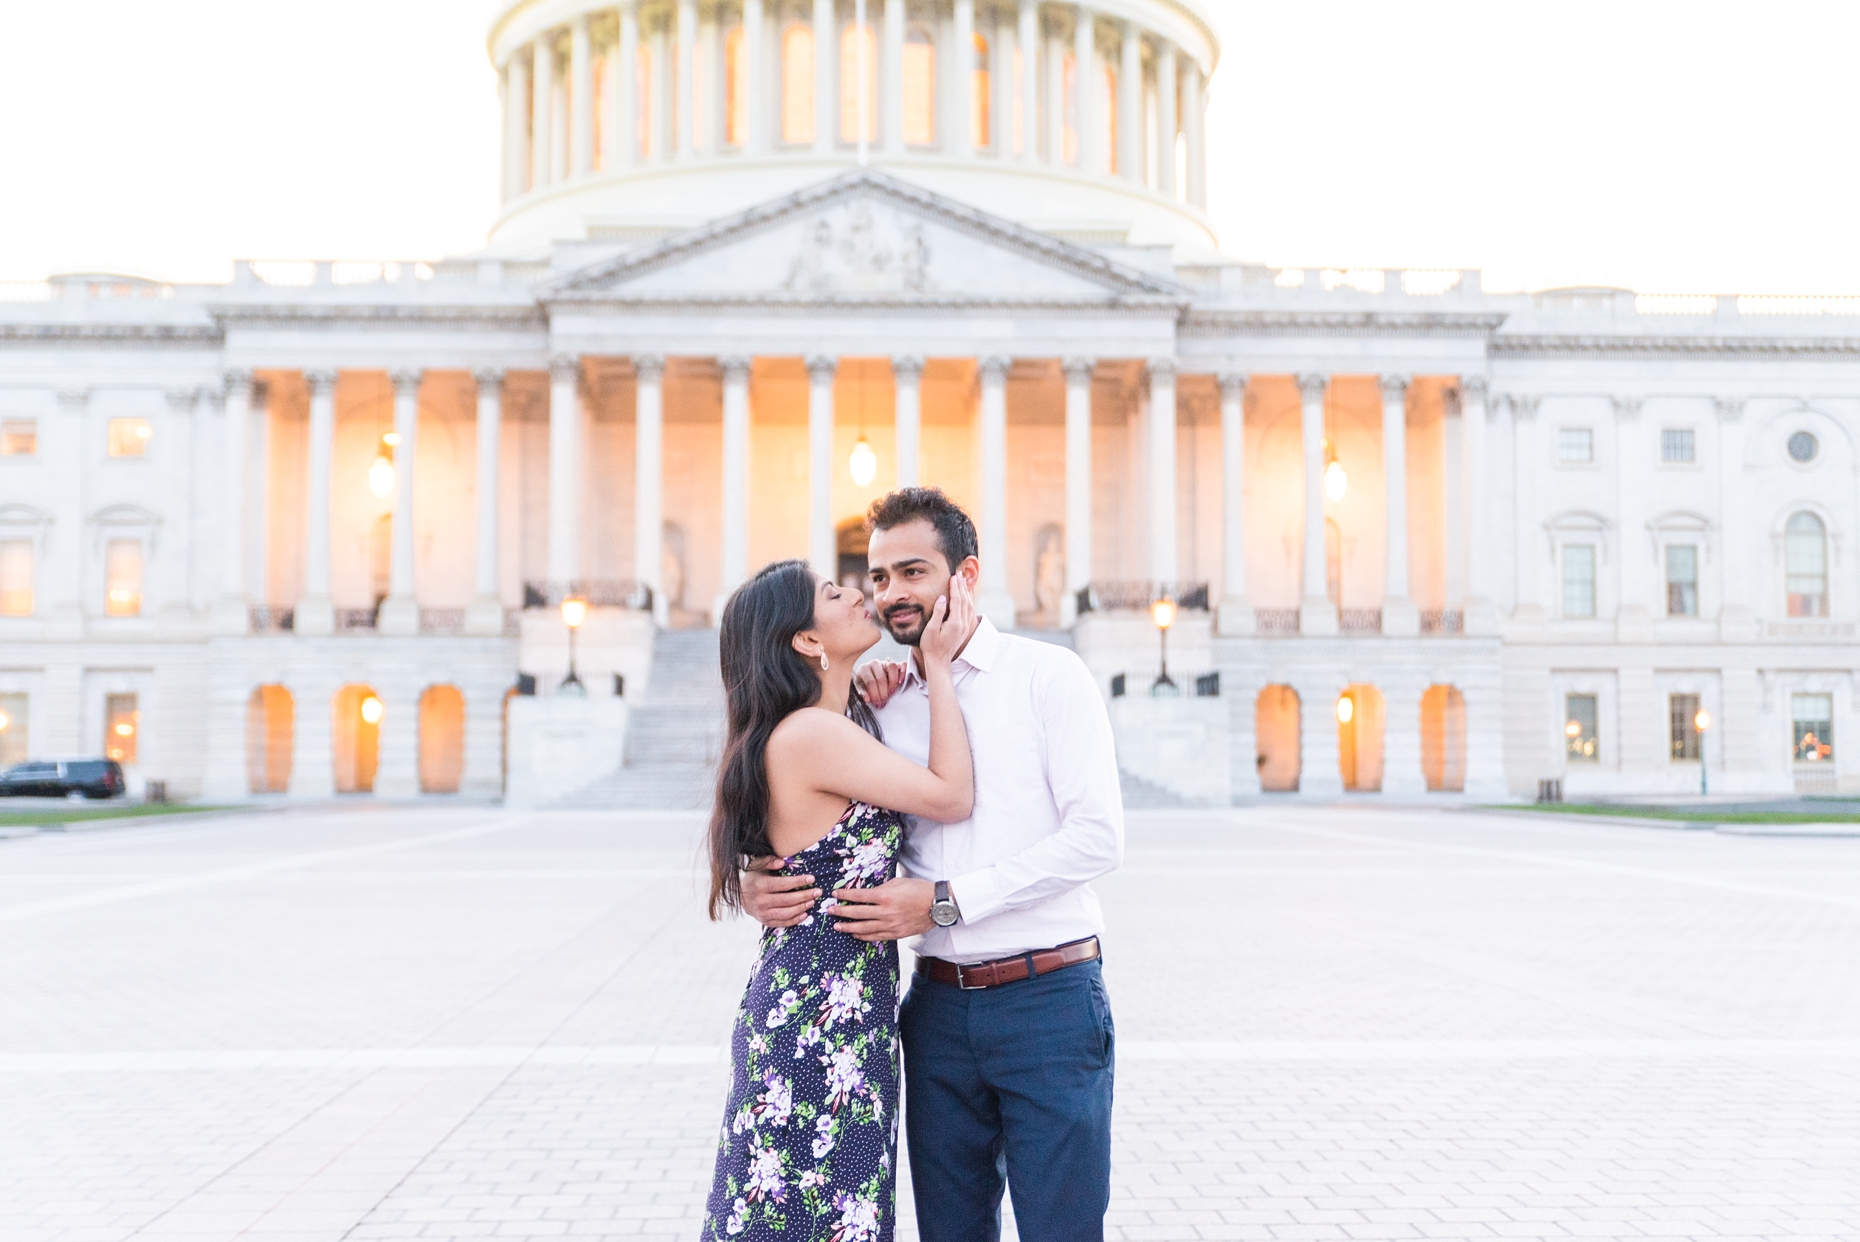 CapitolHillDCEngagementSessionPhotography-ManaliPhotography-032